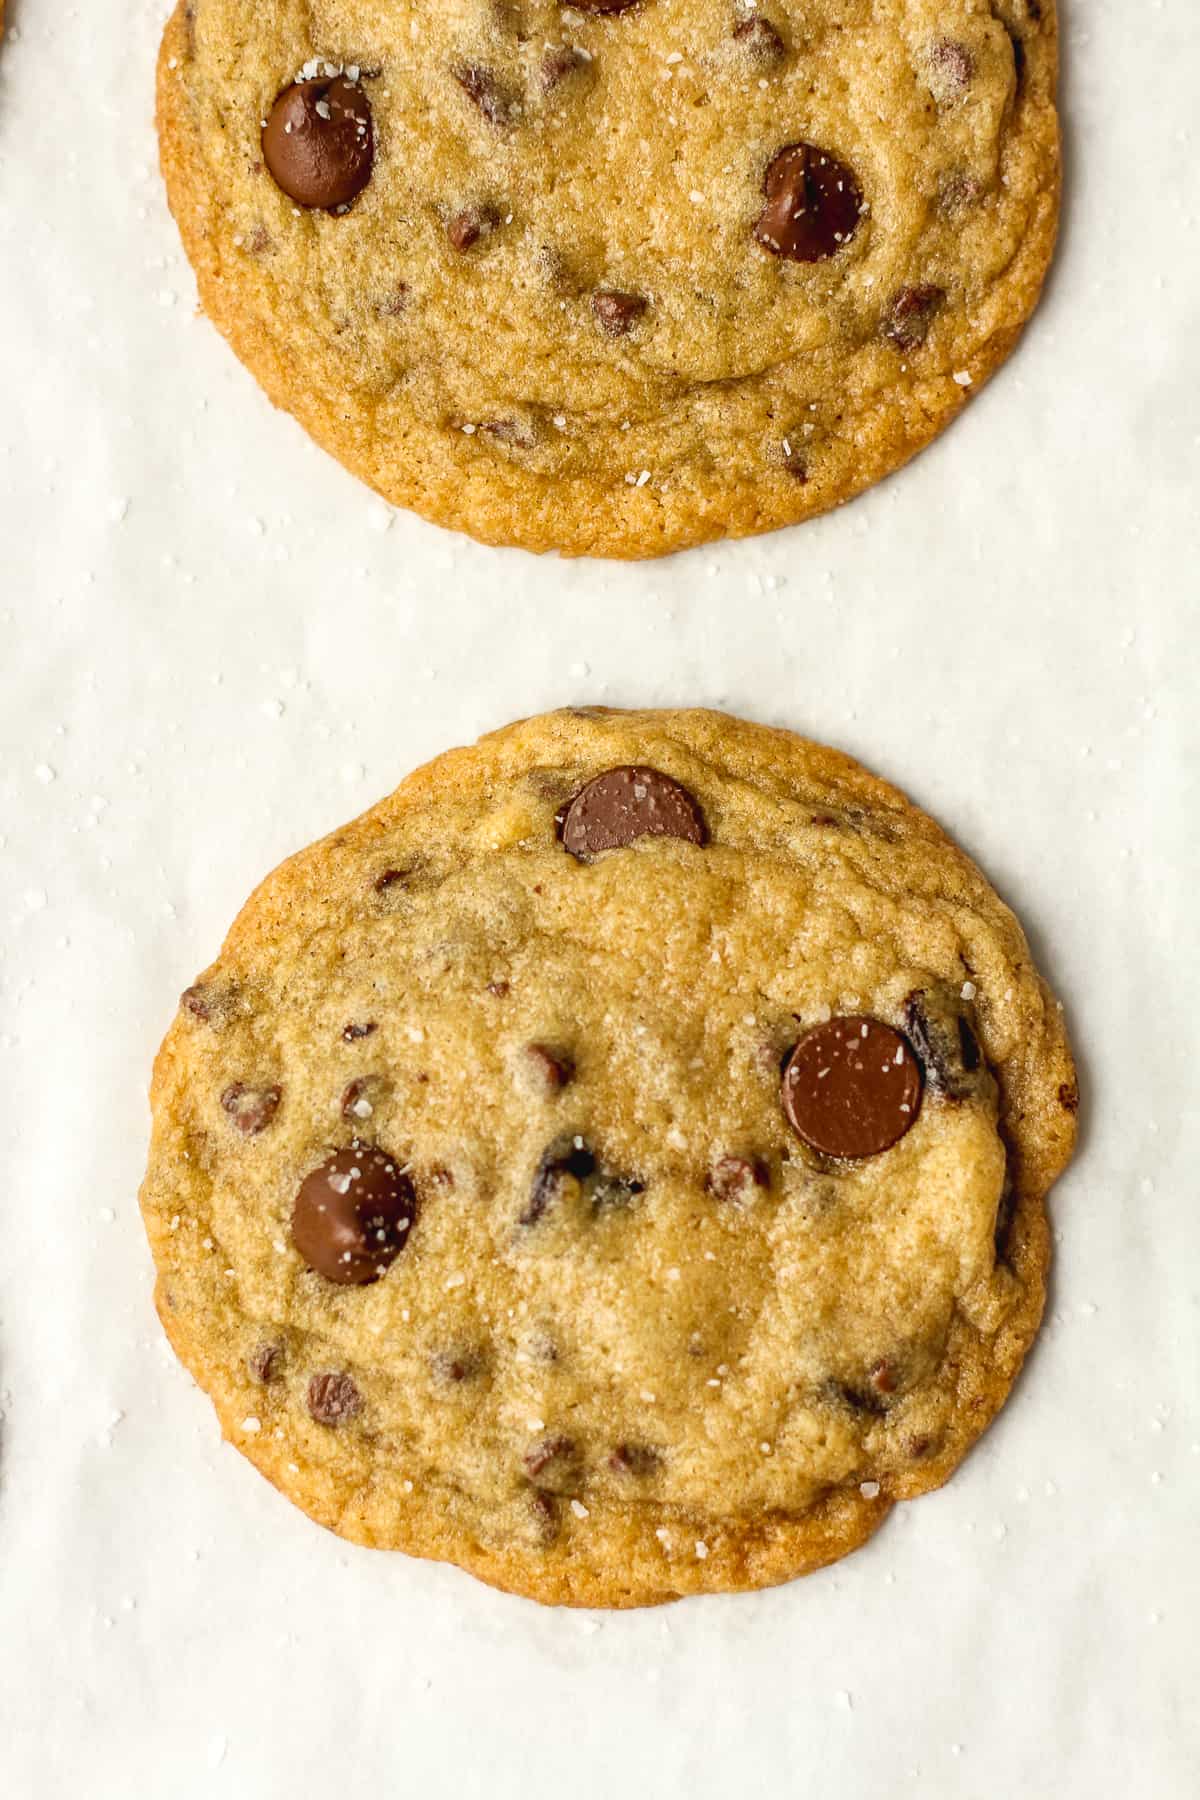 A close-up on two fresh cookies.